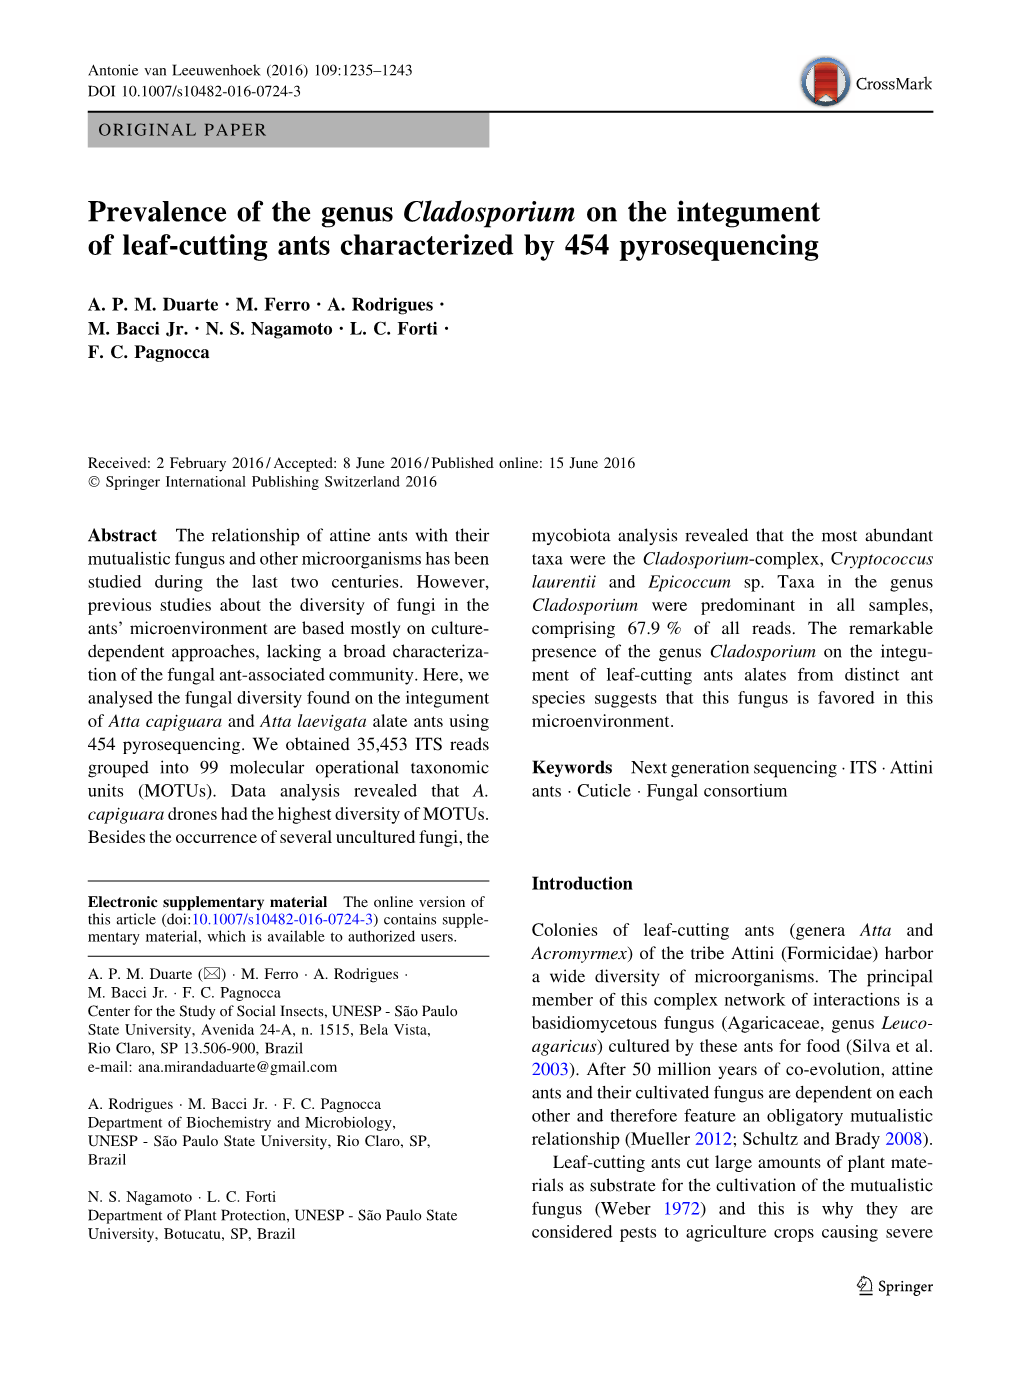 Prevalence of the Genus Cladosporium on the Integument of Leaf-Cutting Ants Characterized by 454 Pyrosequencing